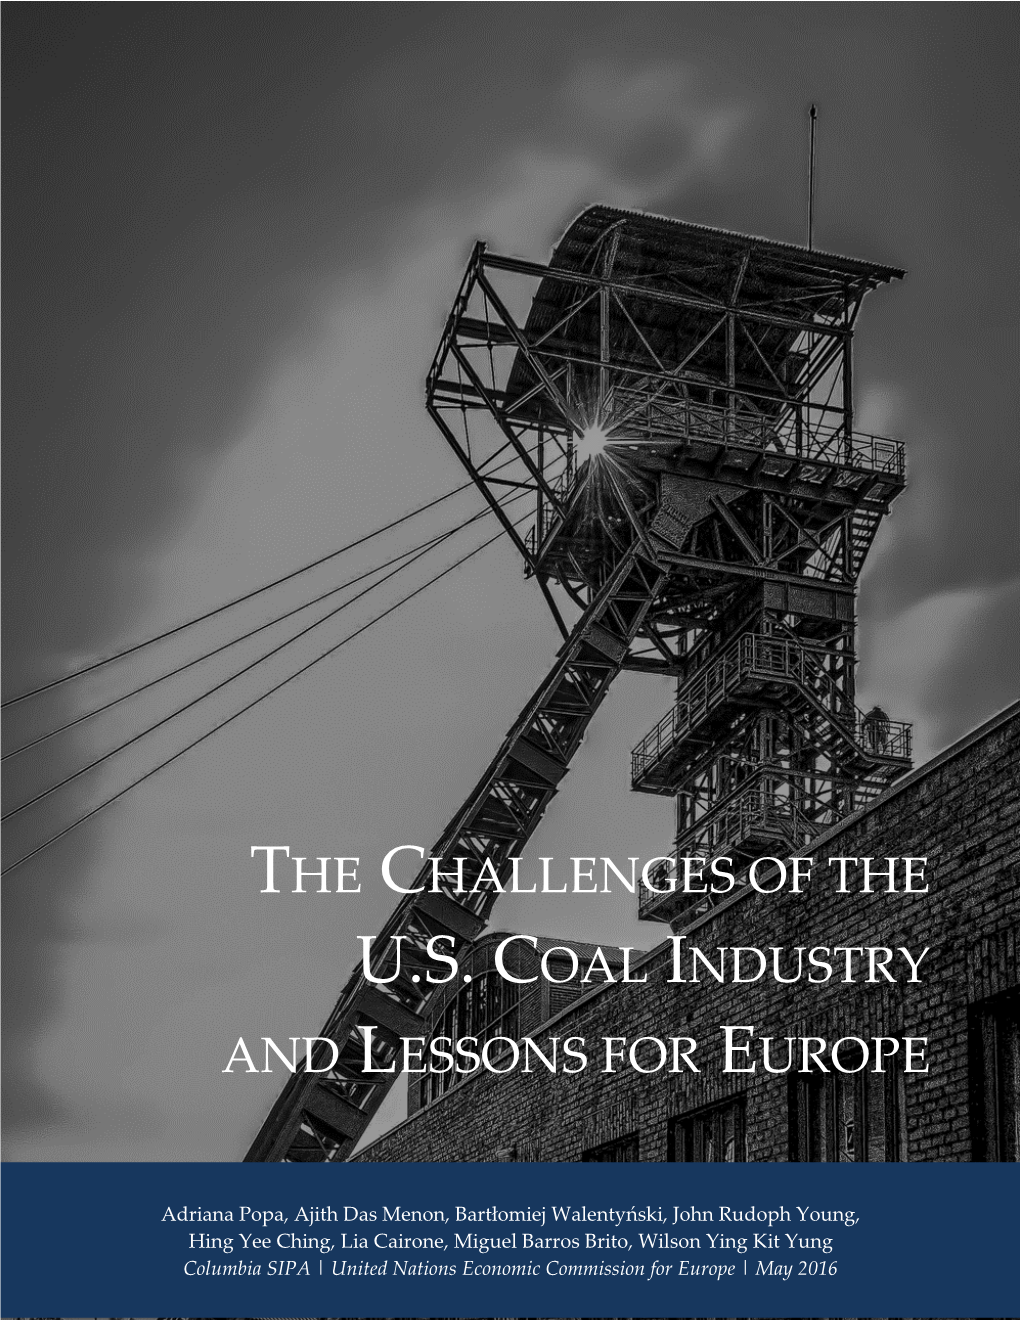 The Challenges of the U.S. Coal Industry and Lessons for Europe